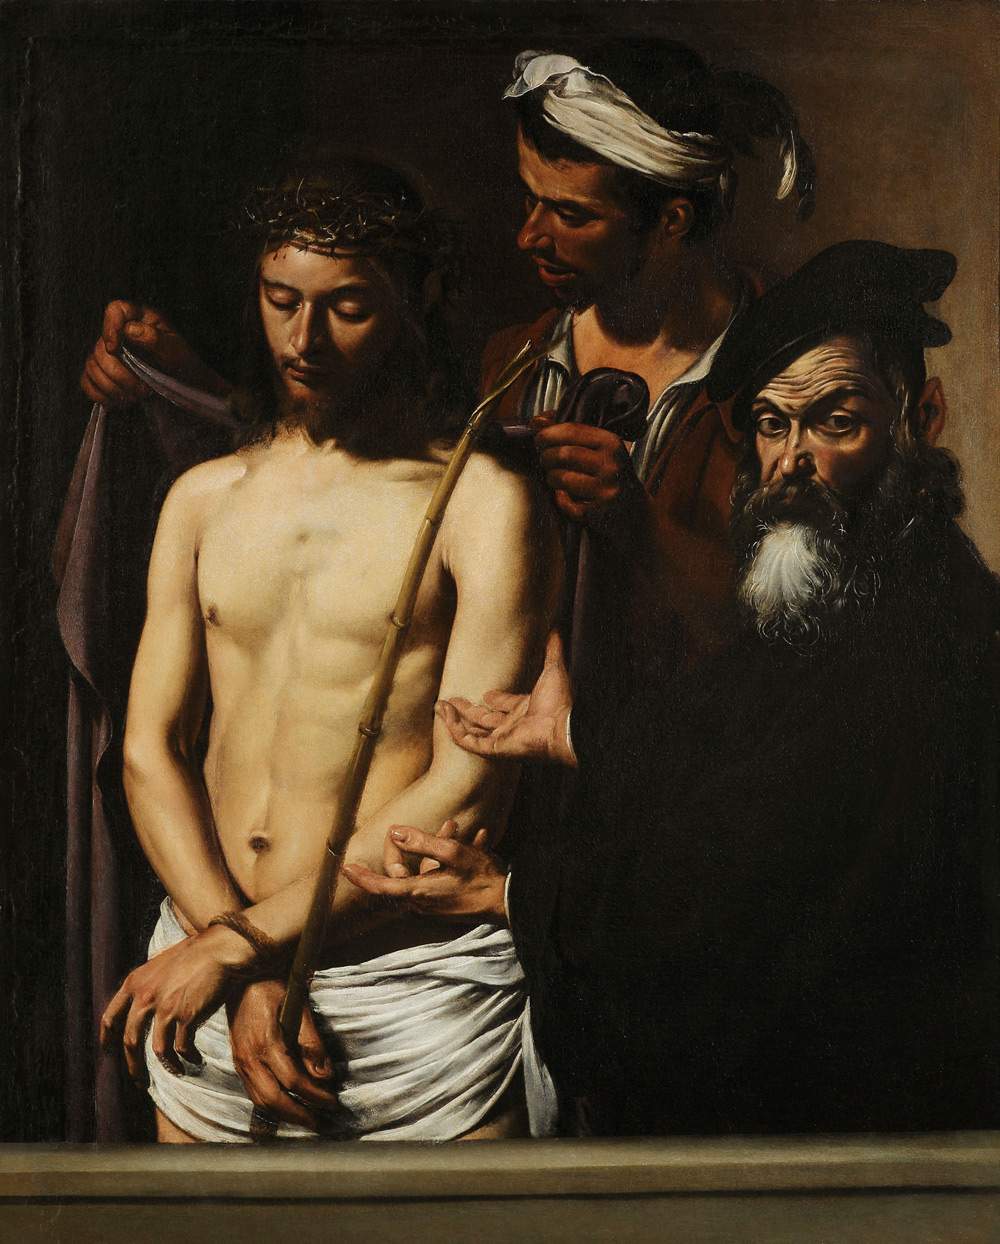 Genoa hosts major conference on Caravaggio with leading Italian experts